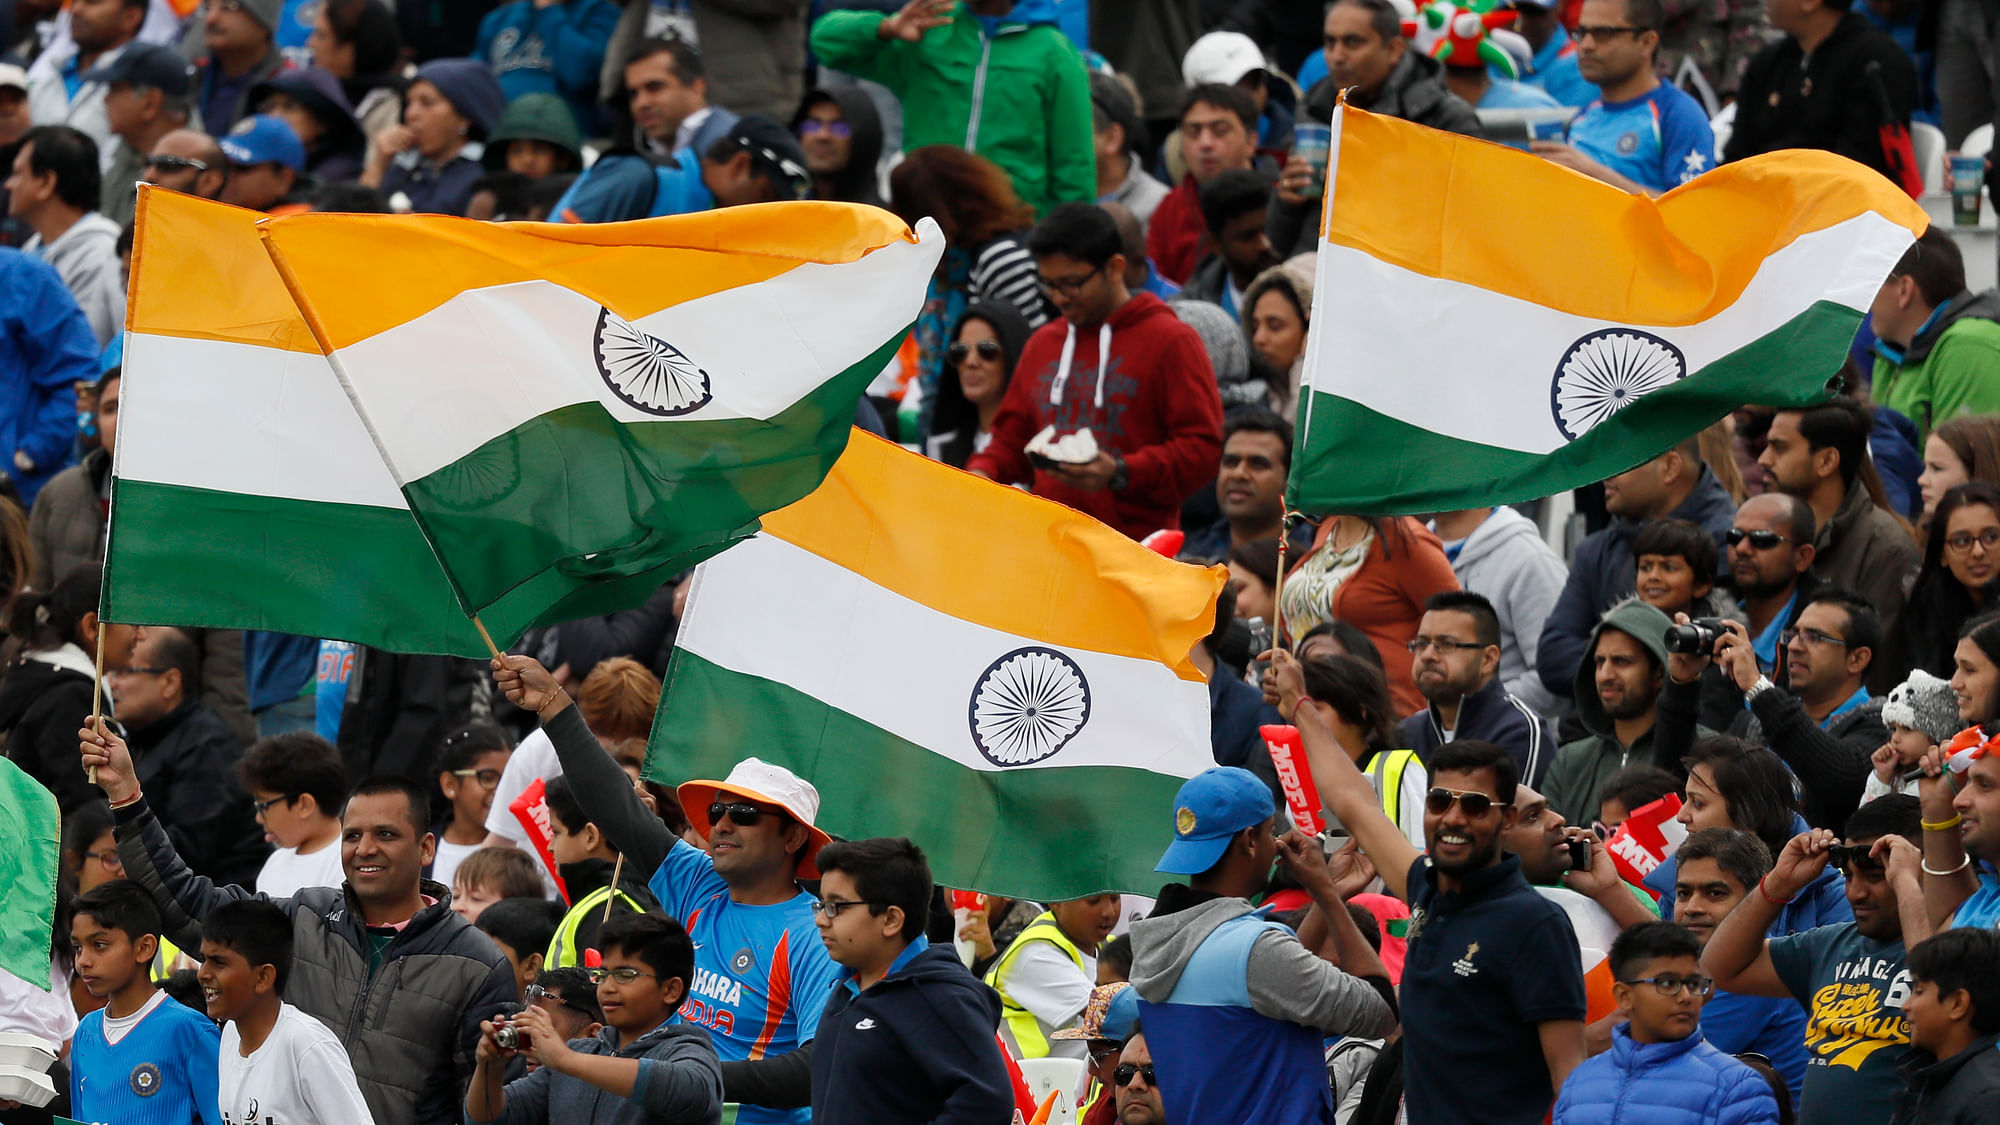 India suffered a shock defeat against Sri Lanka on 8 June at The Oval but its supporters owned the ground. (Photo: AP)